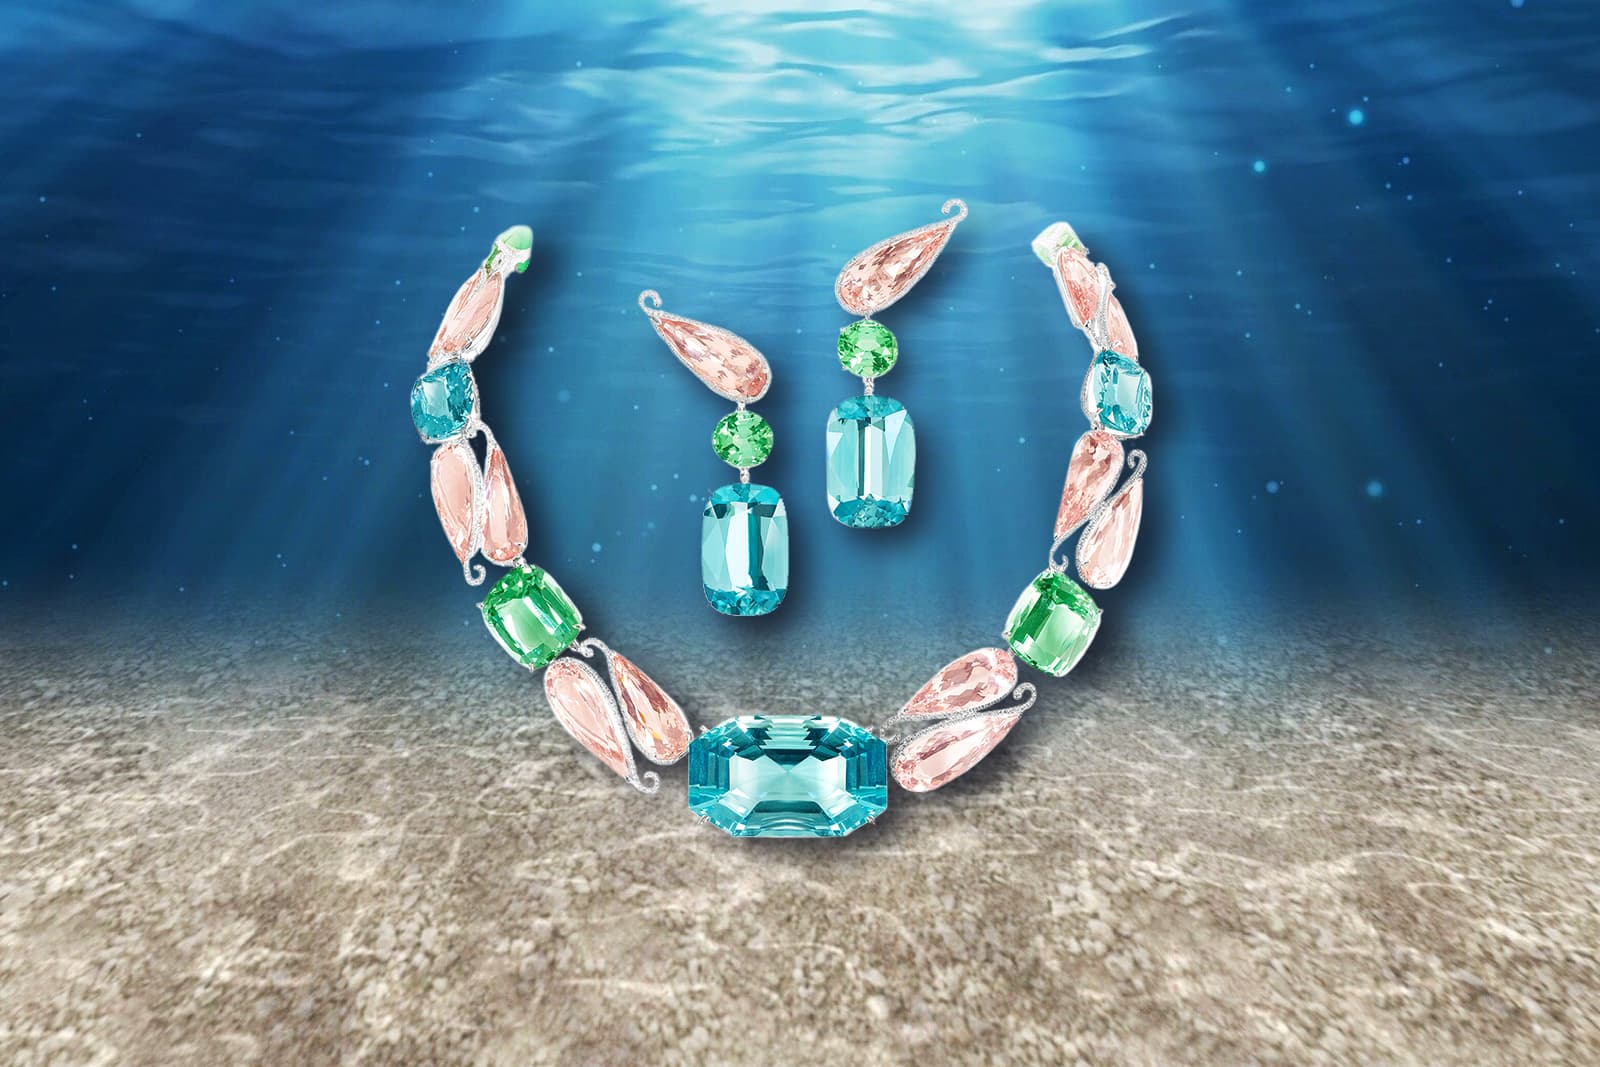 Boghossian Kissing Collection Coral Reef matching necklace and earring suite with aquamarines